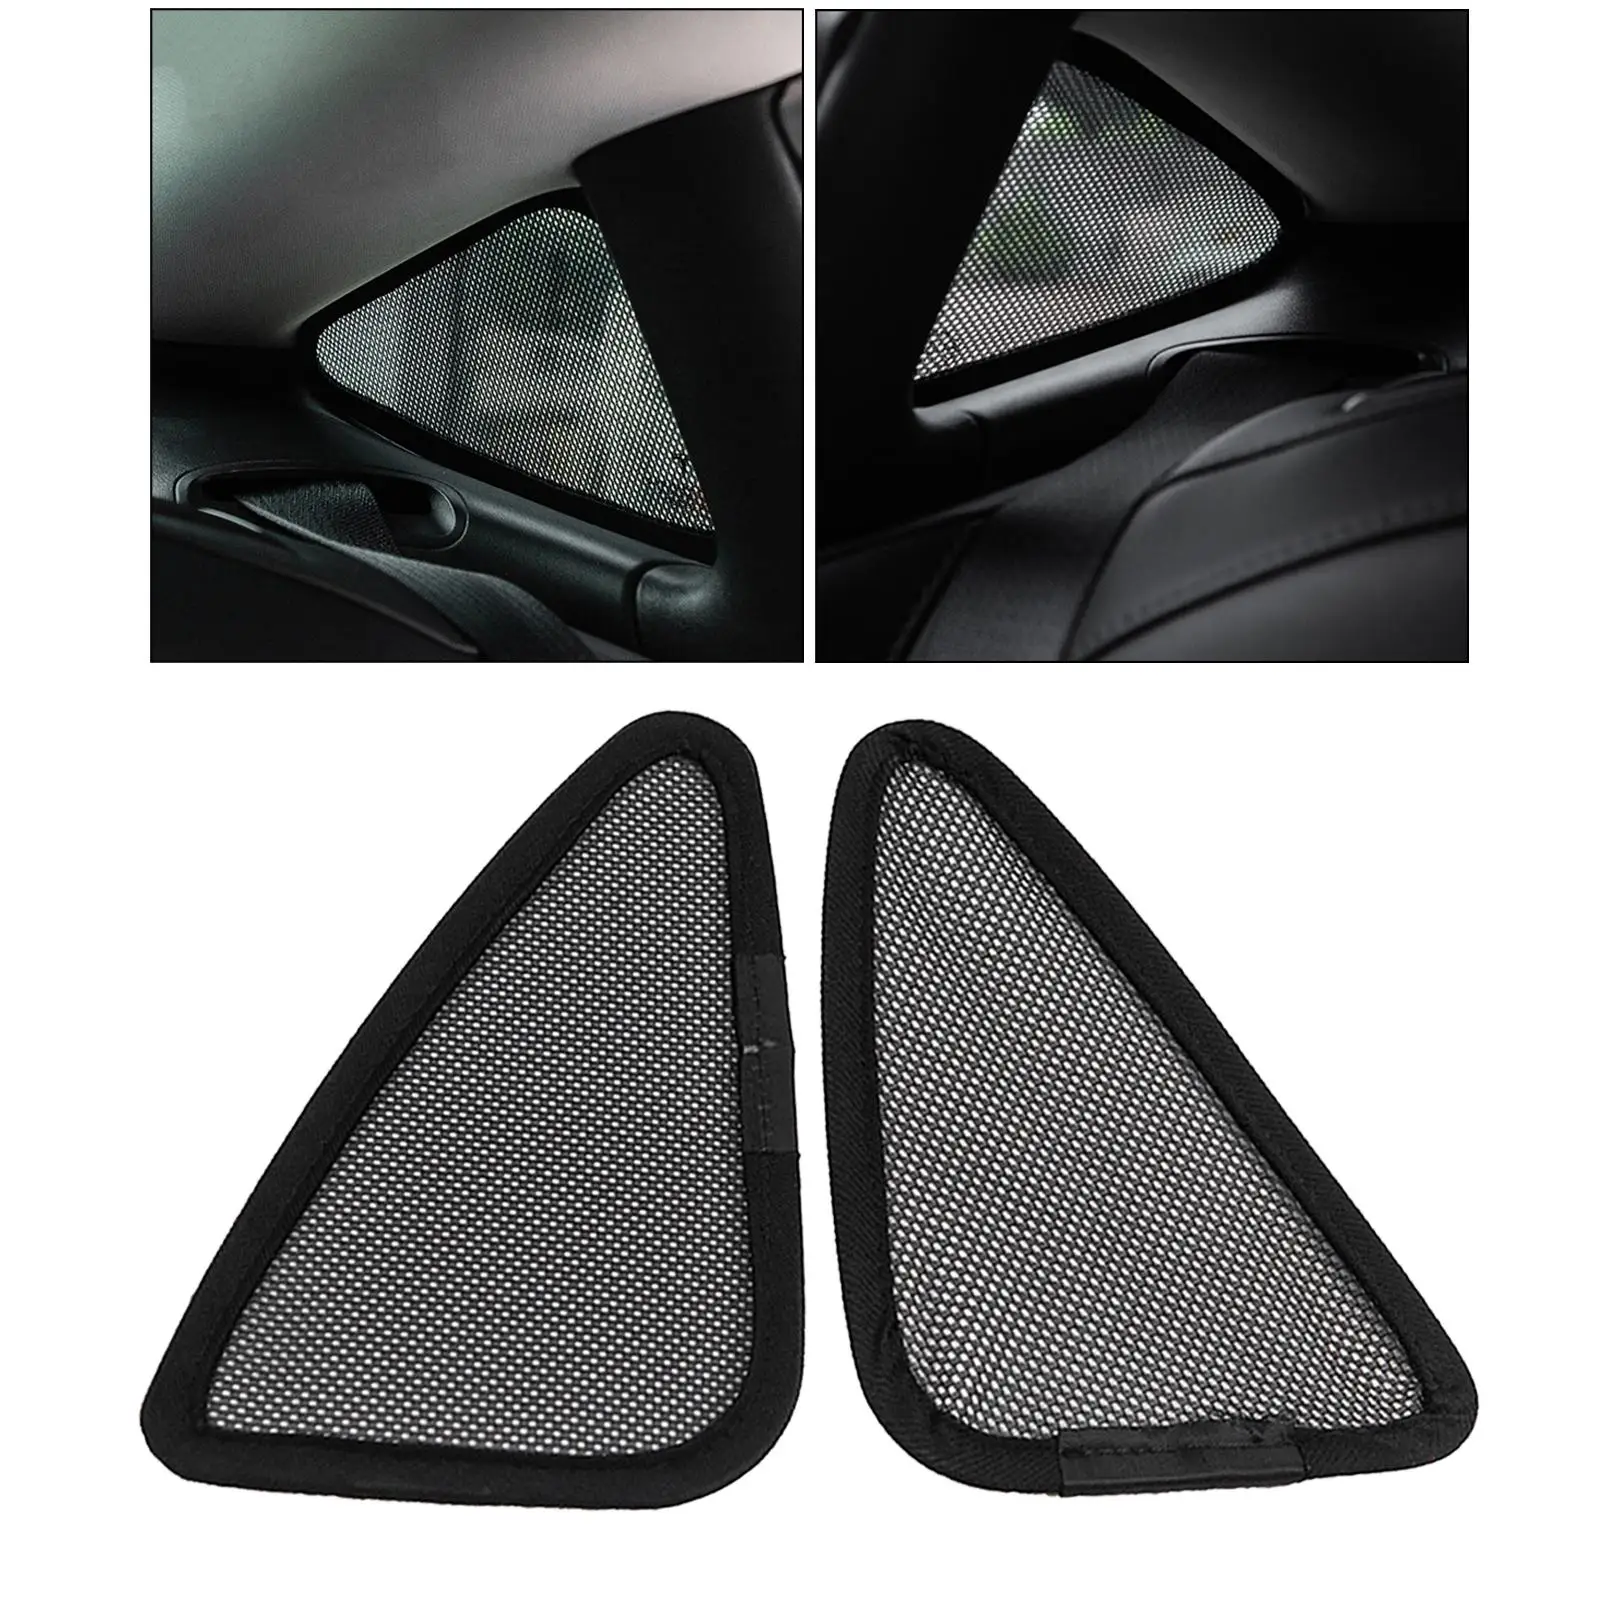 Set of 2 Vehicle Sunshade Line Shades Cover Triangular Net for